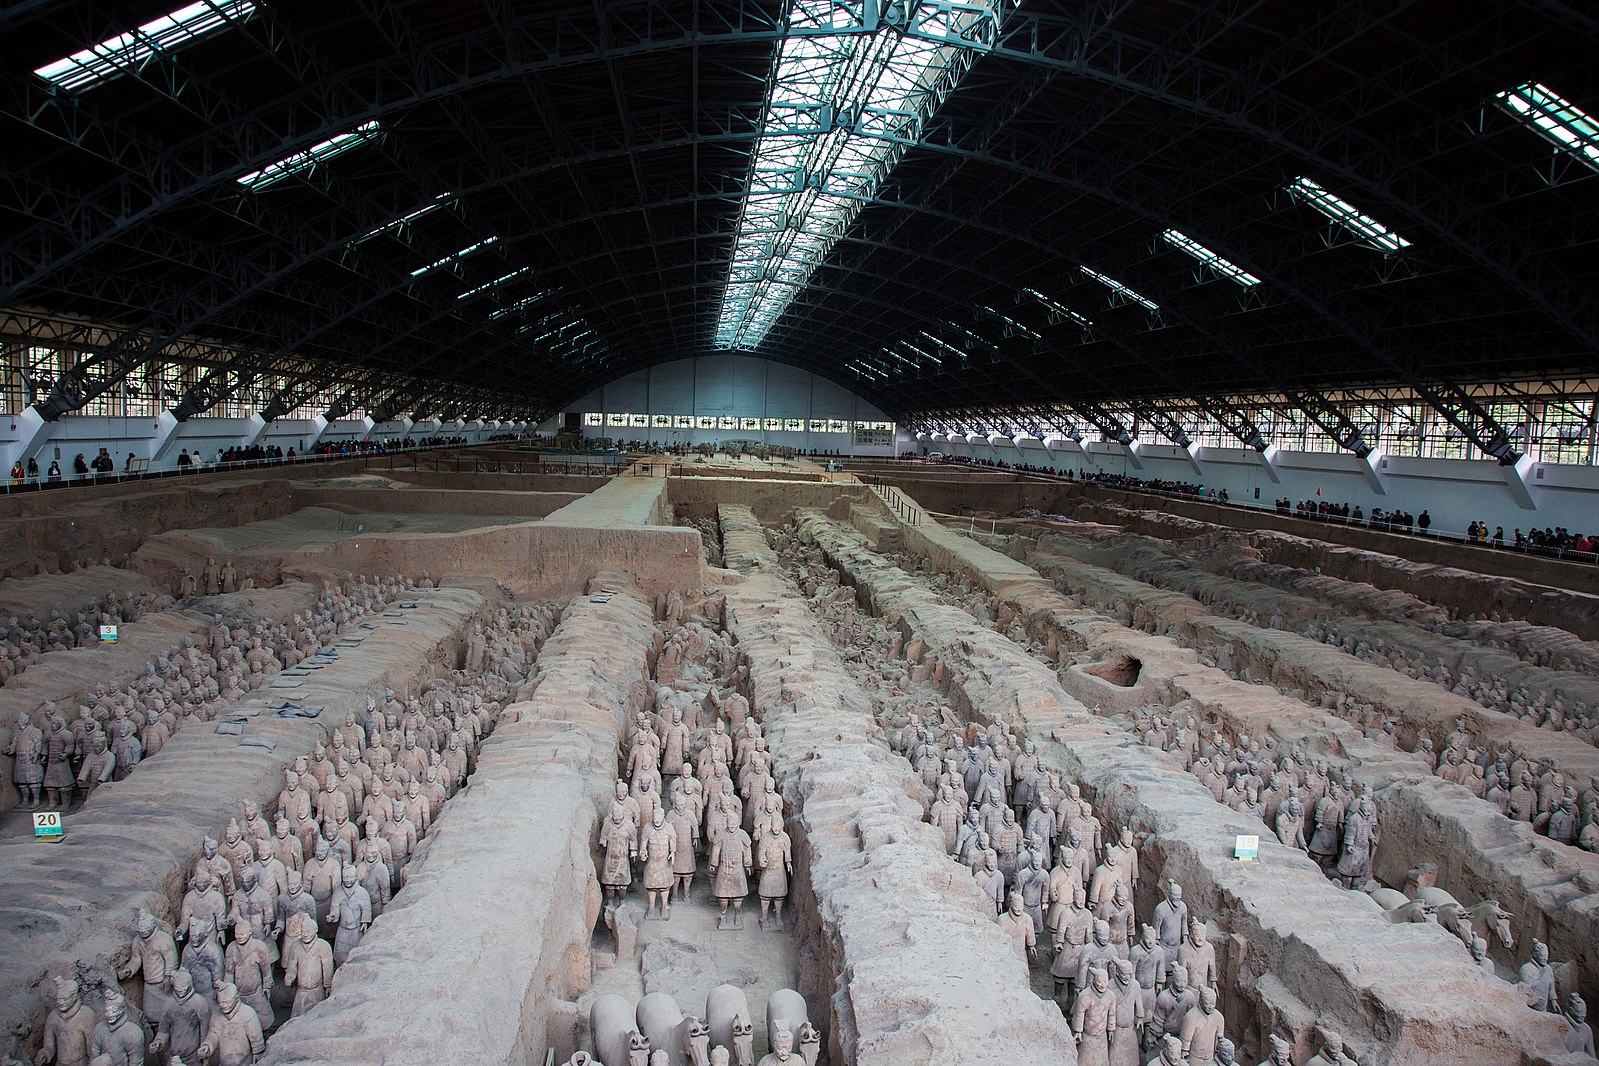 1599px-Terracotta_Army,_View_of_Pit_1.jpg